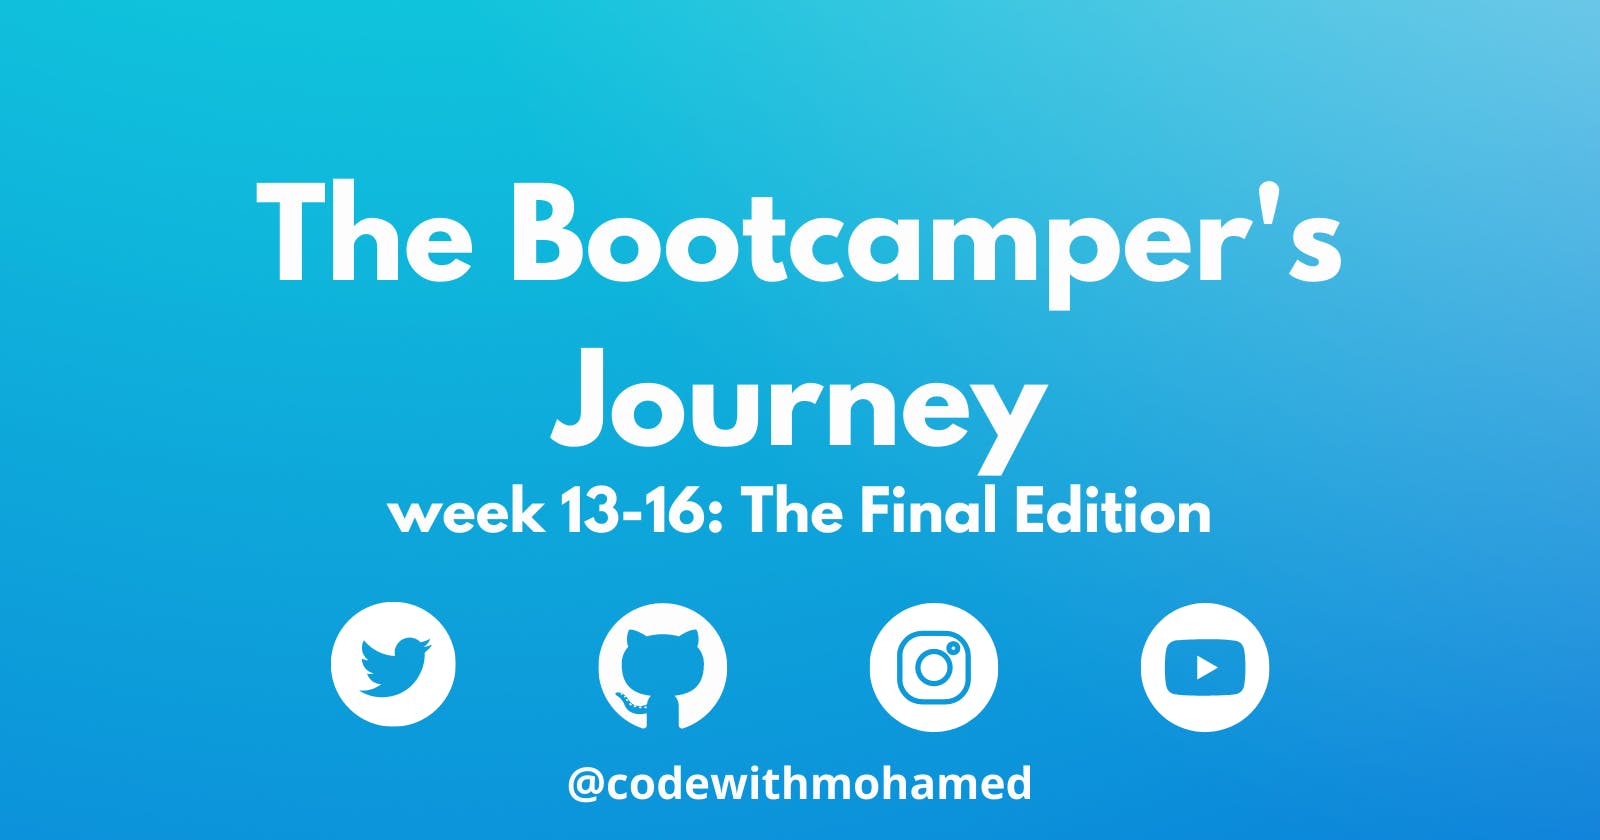 The BootCamper's Journey: The Final Edition